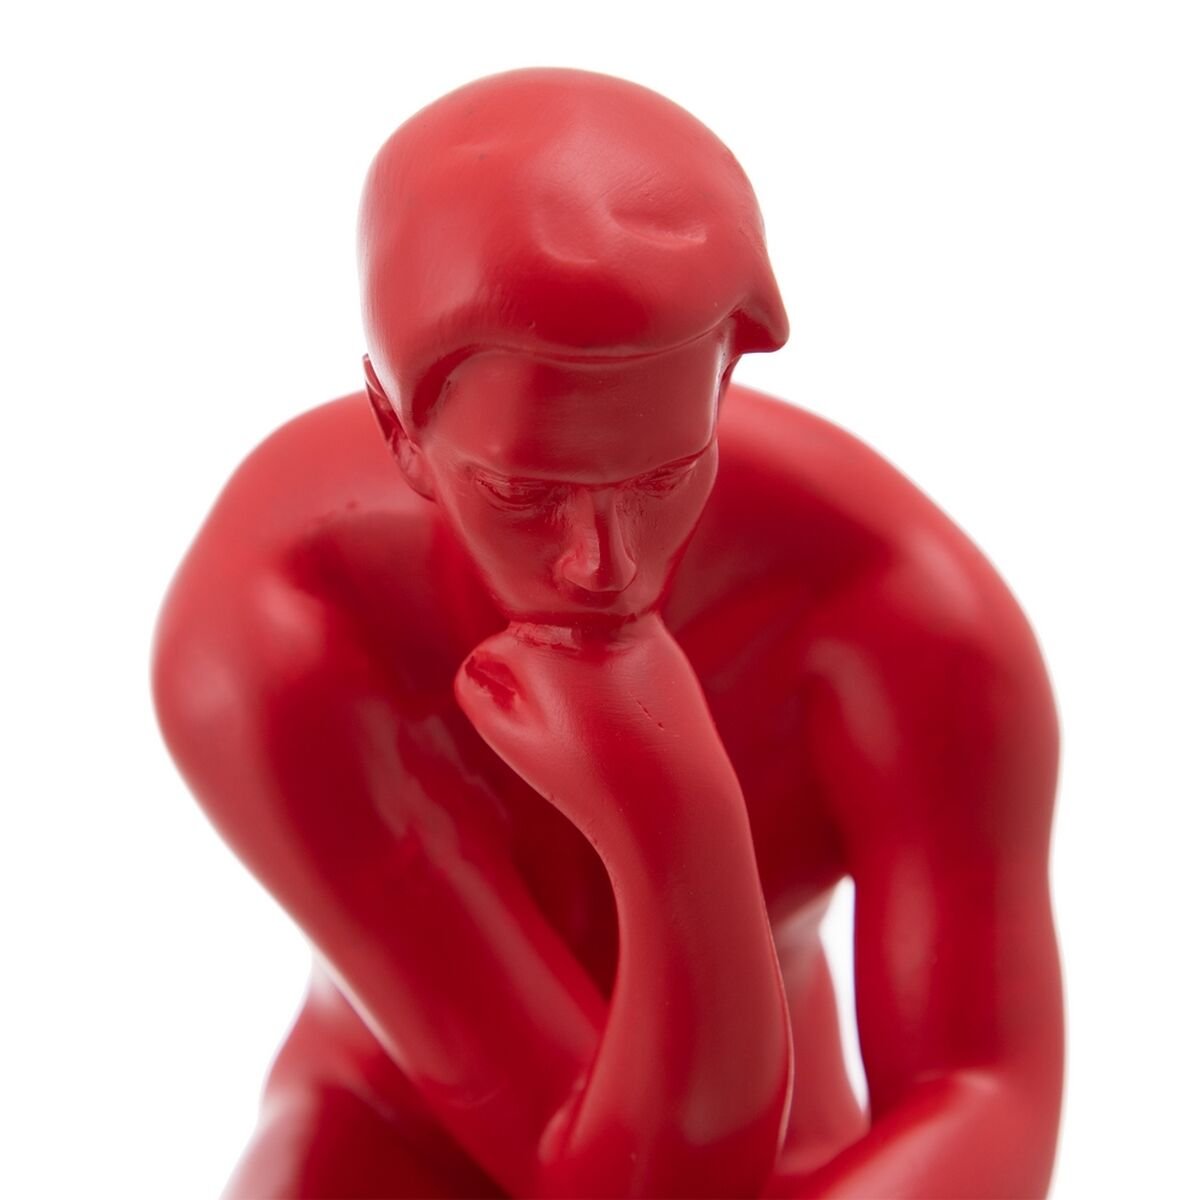 The Red Thinker 14 x 11 x 22,5 cm